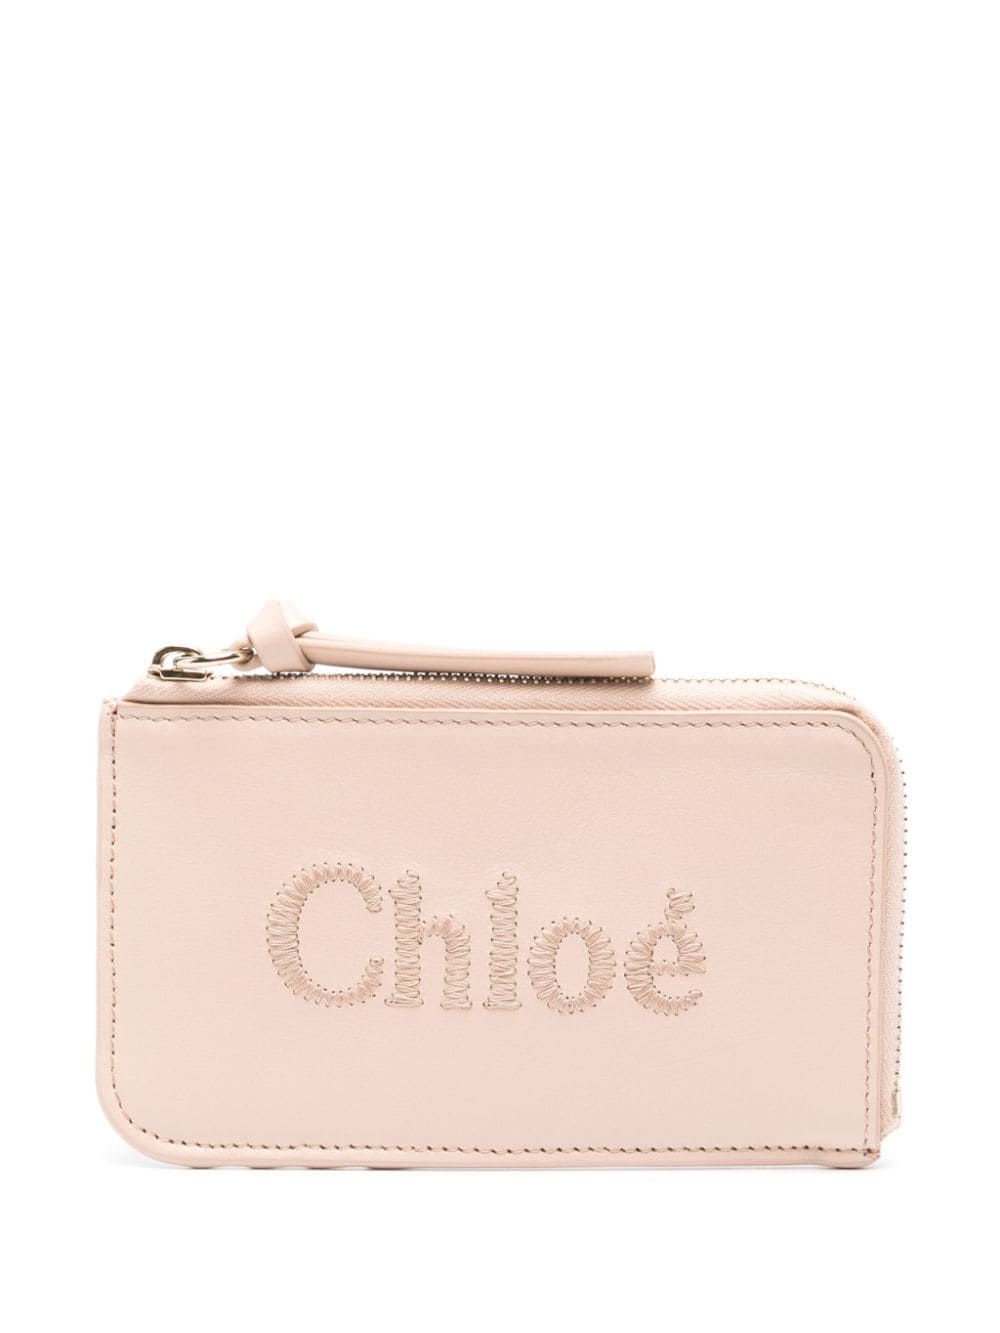 Chloé logo-embroidered leather wallet